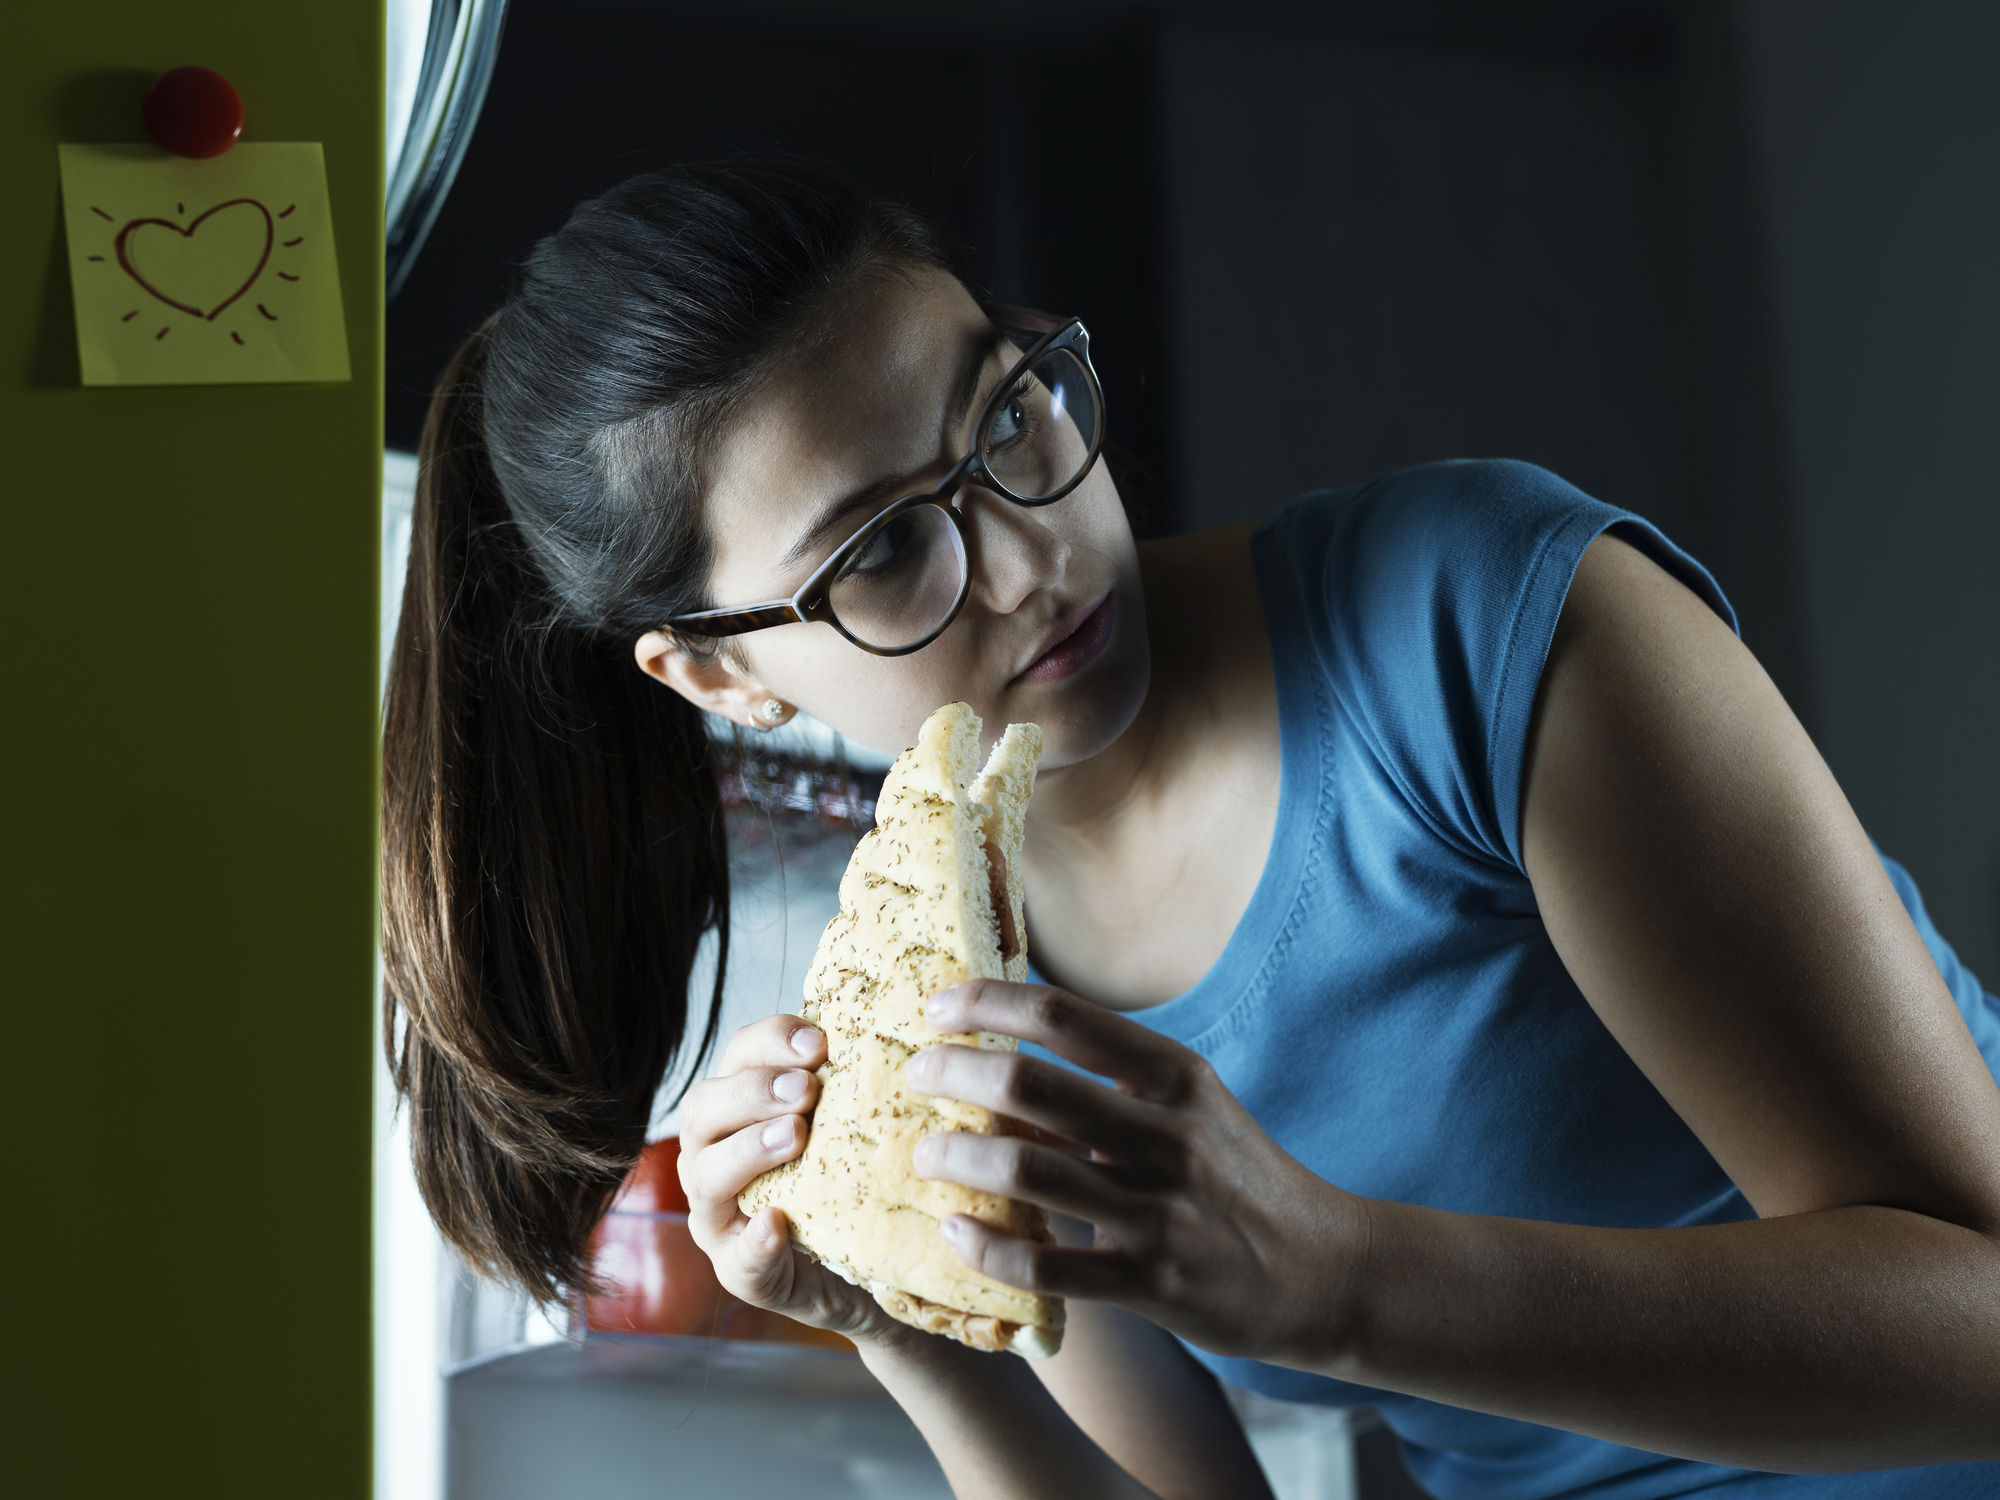 Young woman having a late night snack, she is taking a sandwich fron the fridge and eating it, diet fail concept